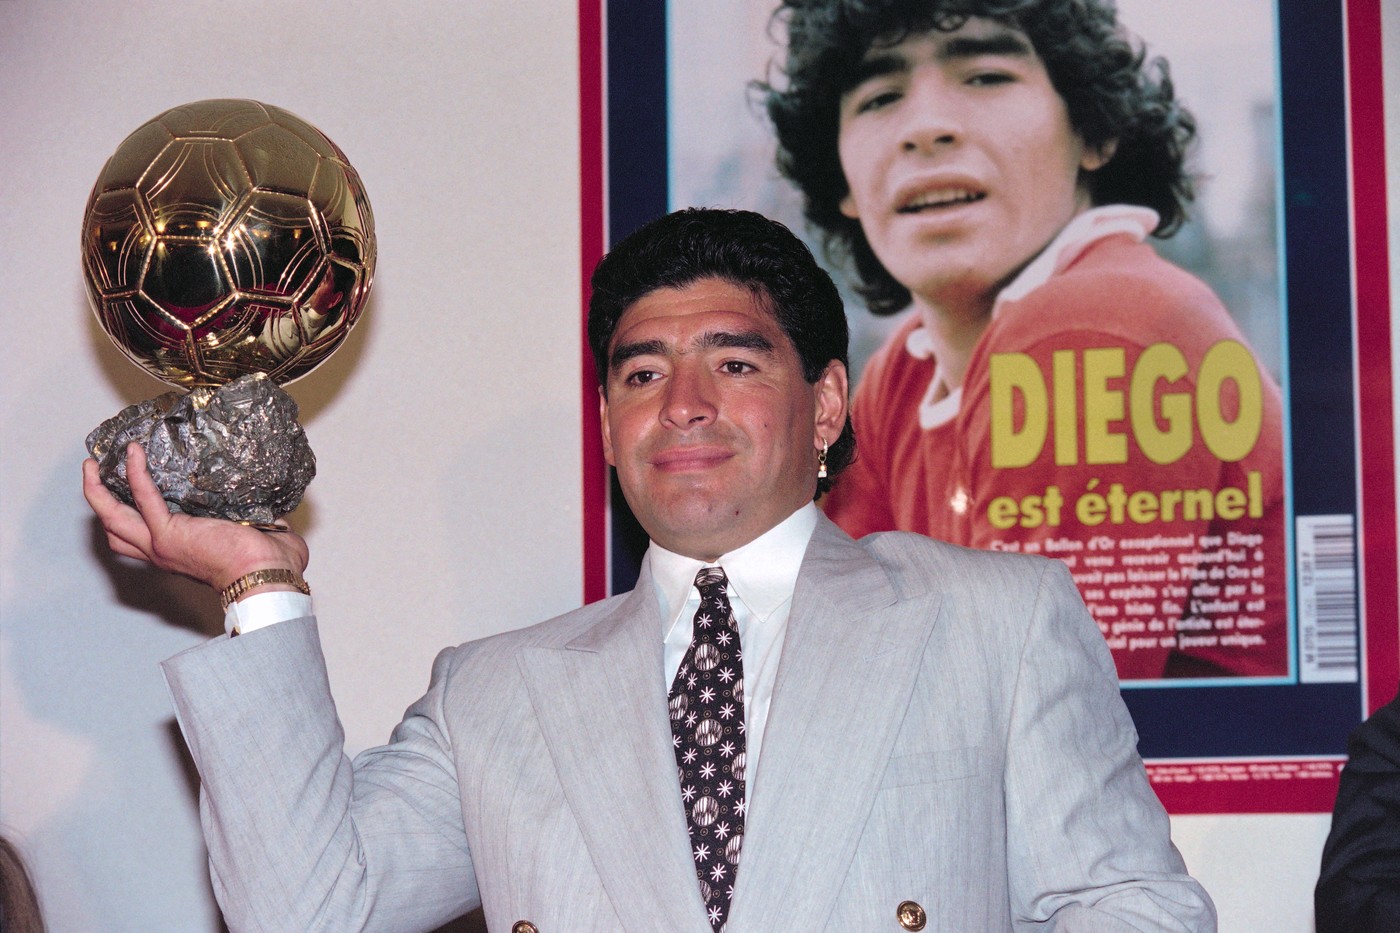 Argentinian football star Diego Maradona poses after receiving the honorary 